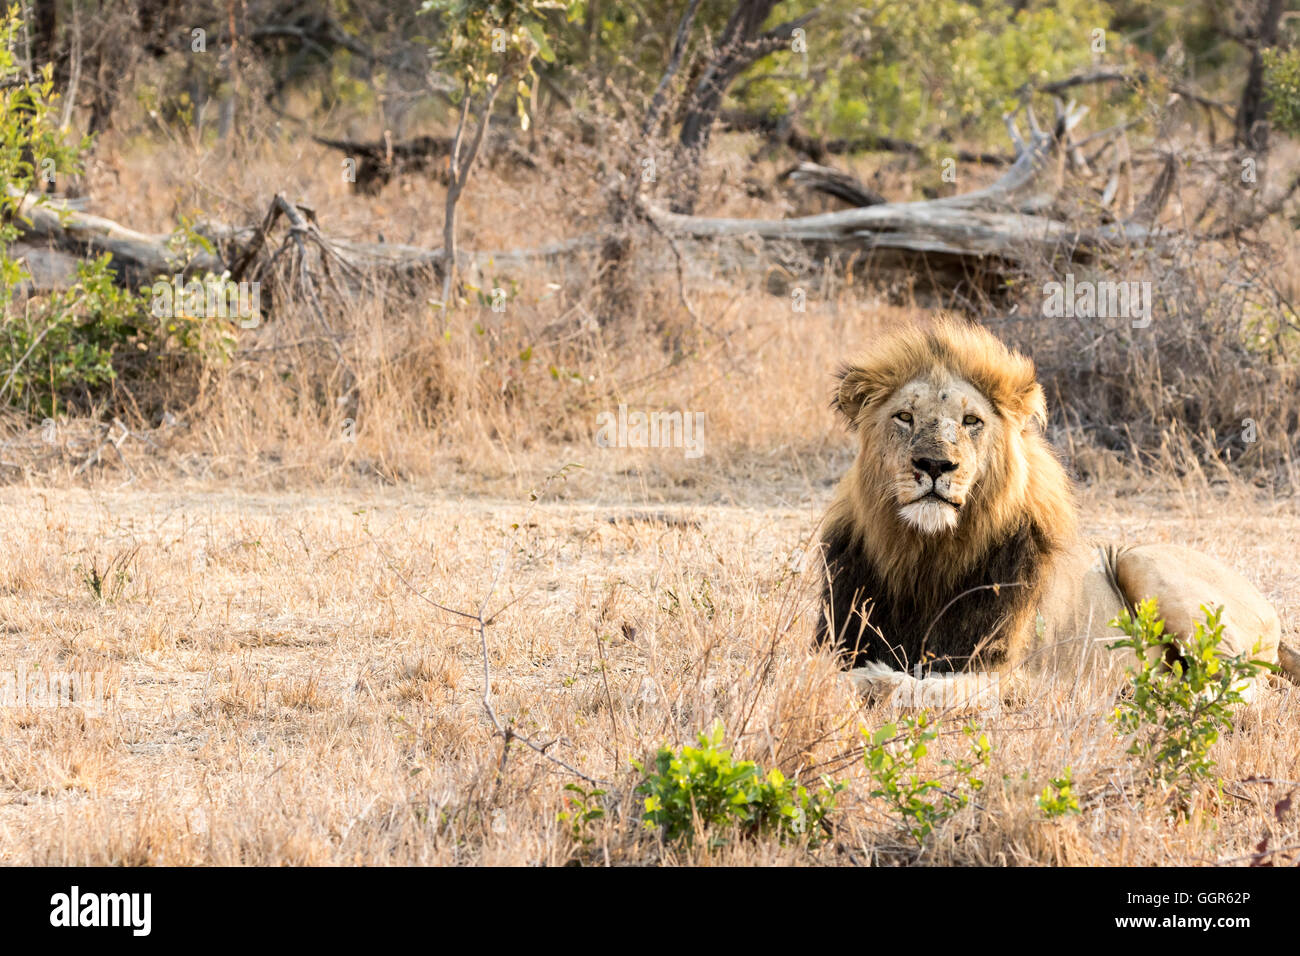 Manjingilane pride male lion, Exeter Private Game Reserve, Sabi Sands, South Africa Stock Photo